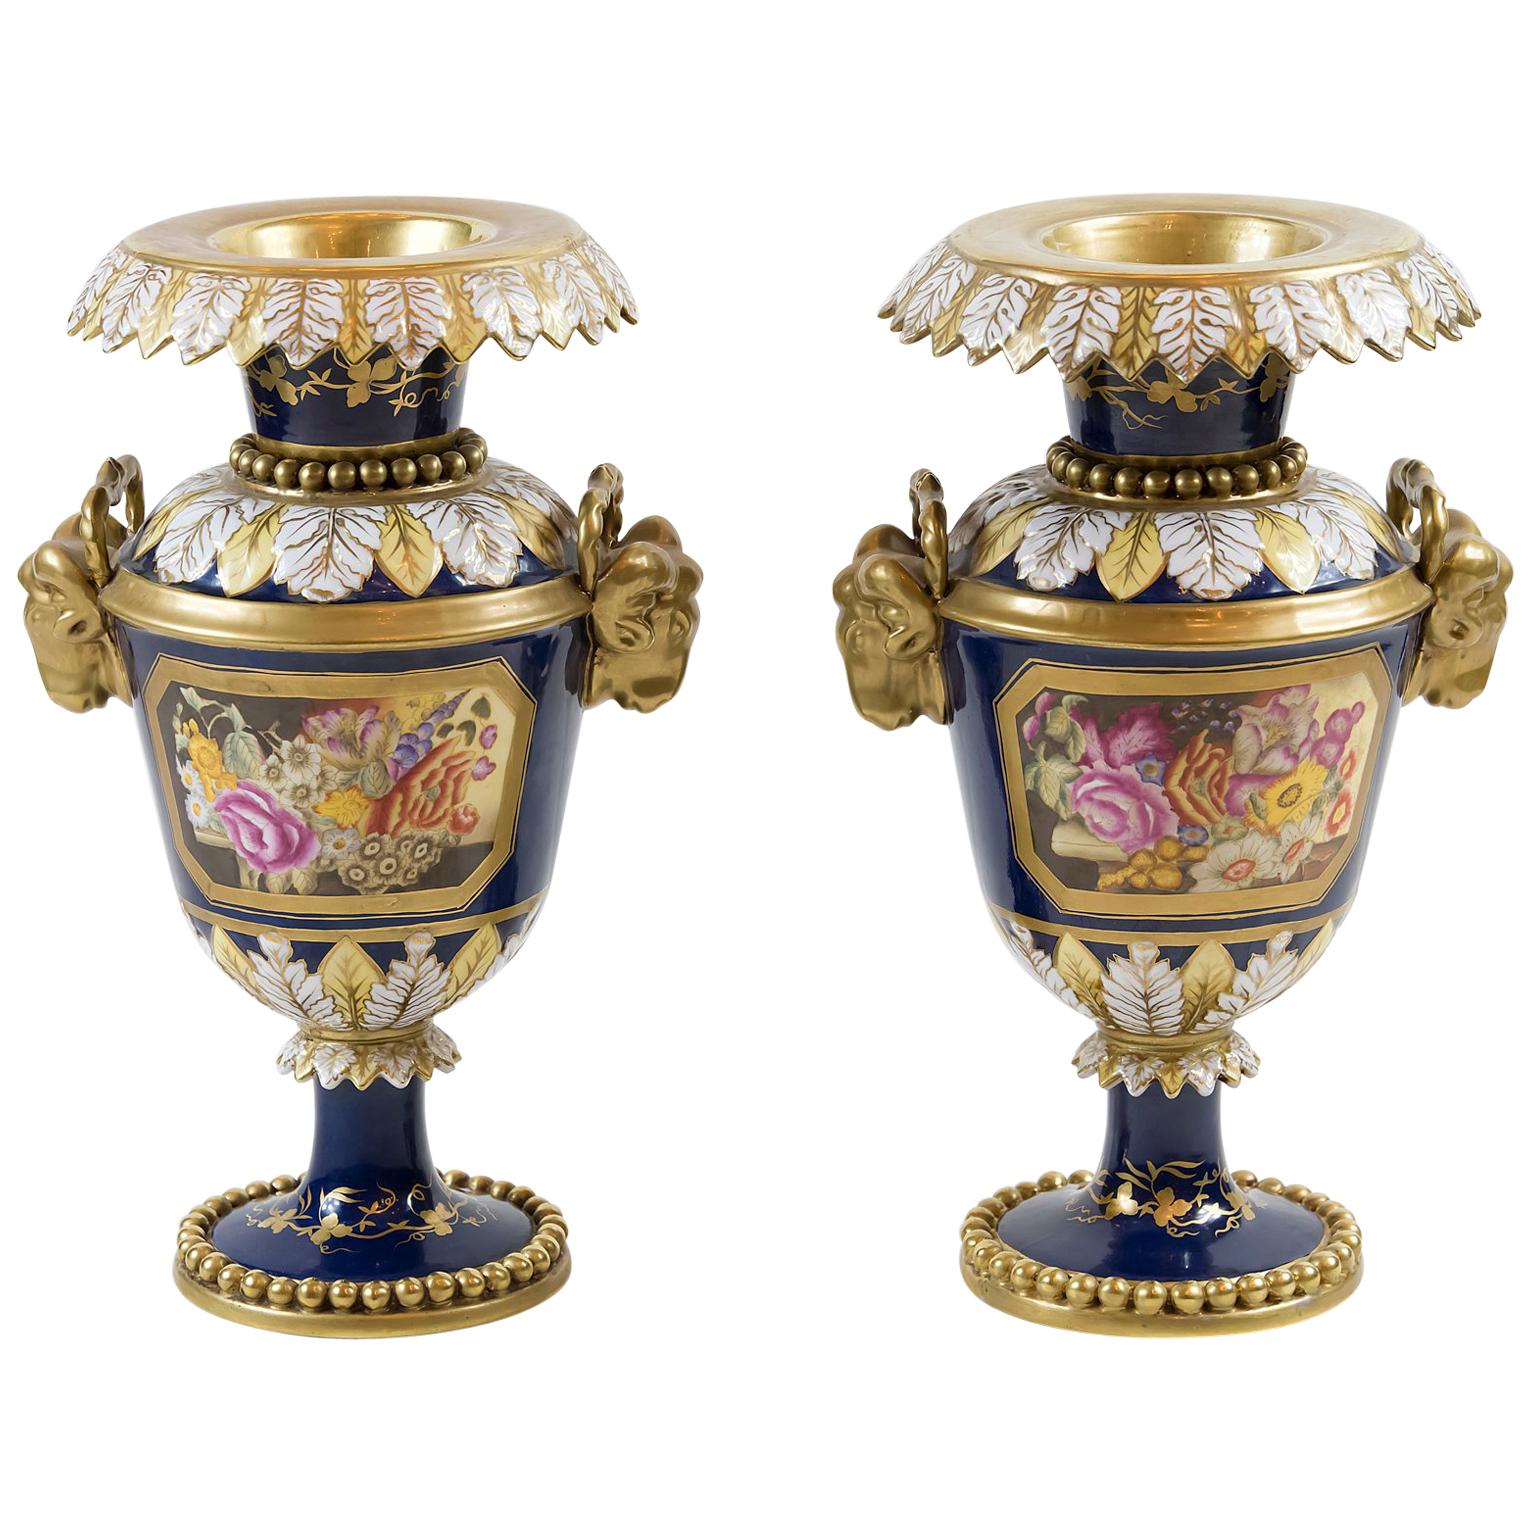 Pair of Sèvres Style French Porcelain Cobalt Blue Vases with Handmade Decor